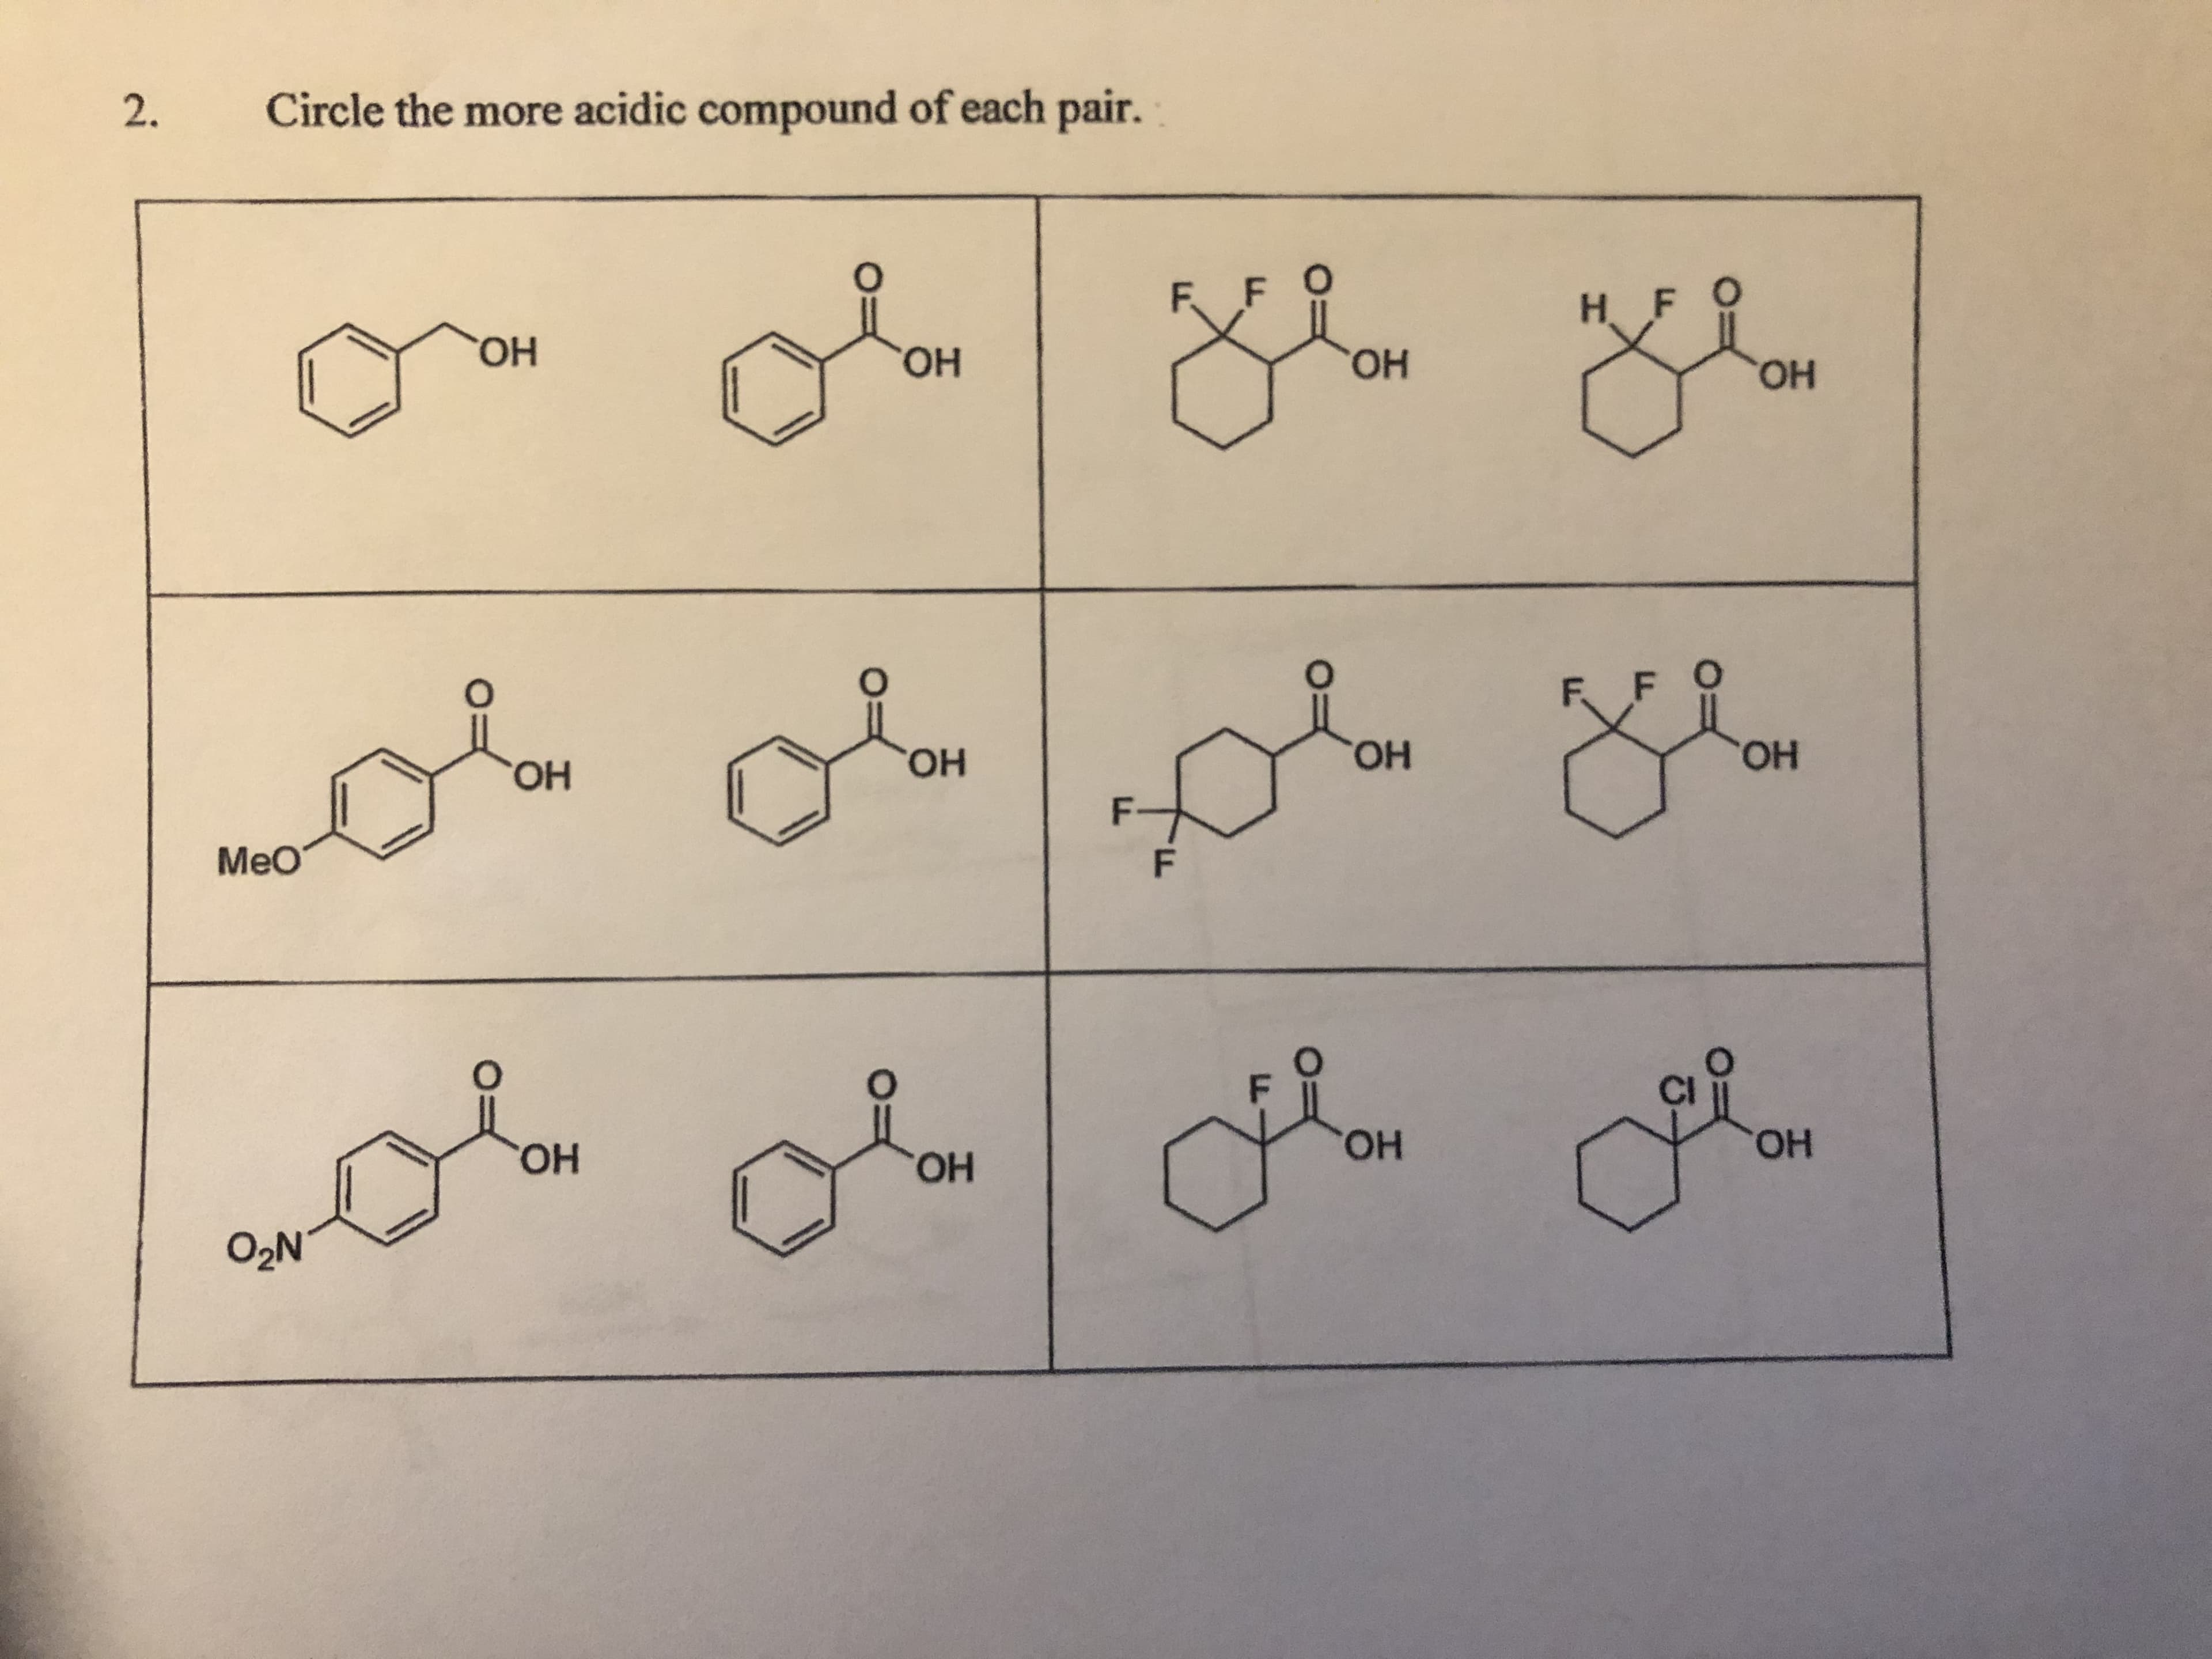 2.
Circle the more acidic compound of each pair.
Н.
Но.
"ОН
ГОН
HO,
HO,
ОН
ОН
ОН
MeO
Он
Он
ОН
но,
O2N
